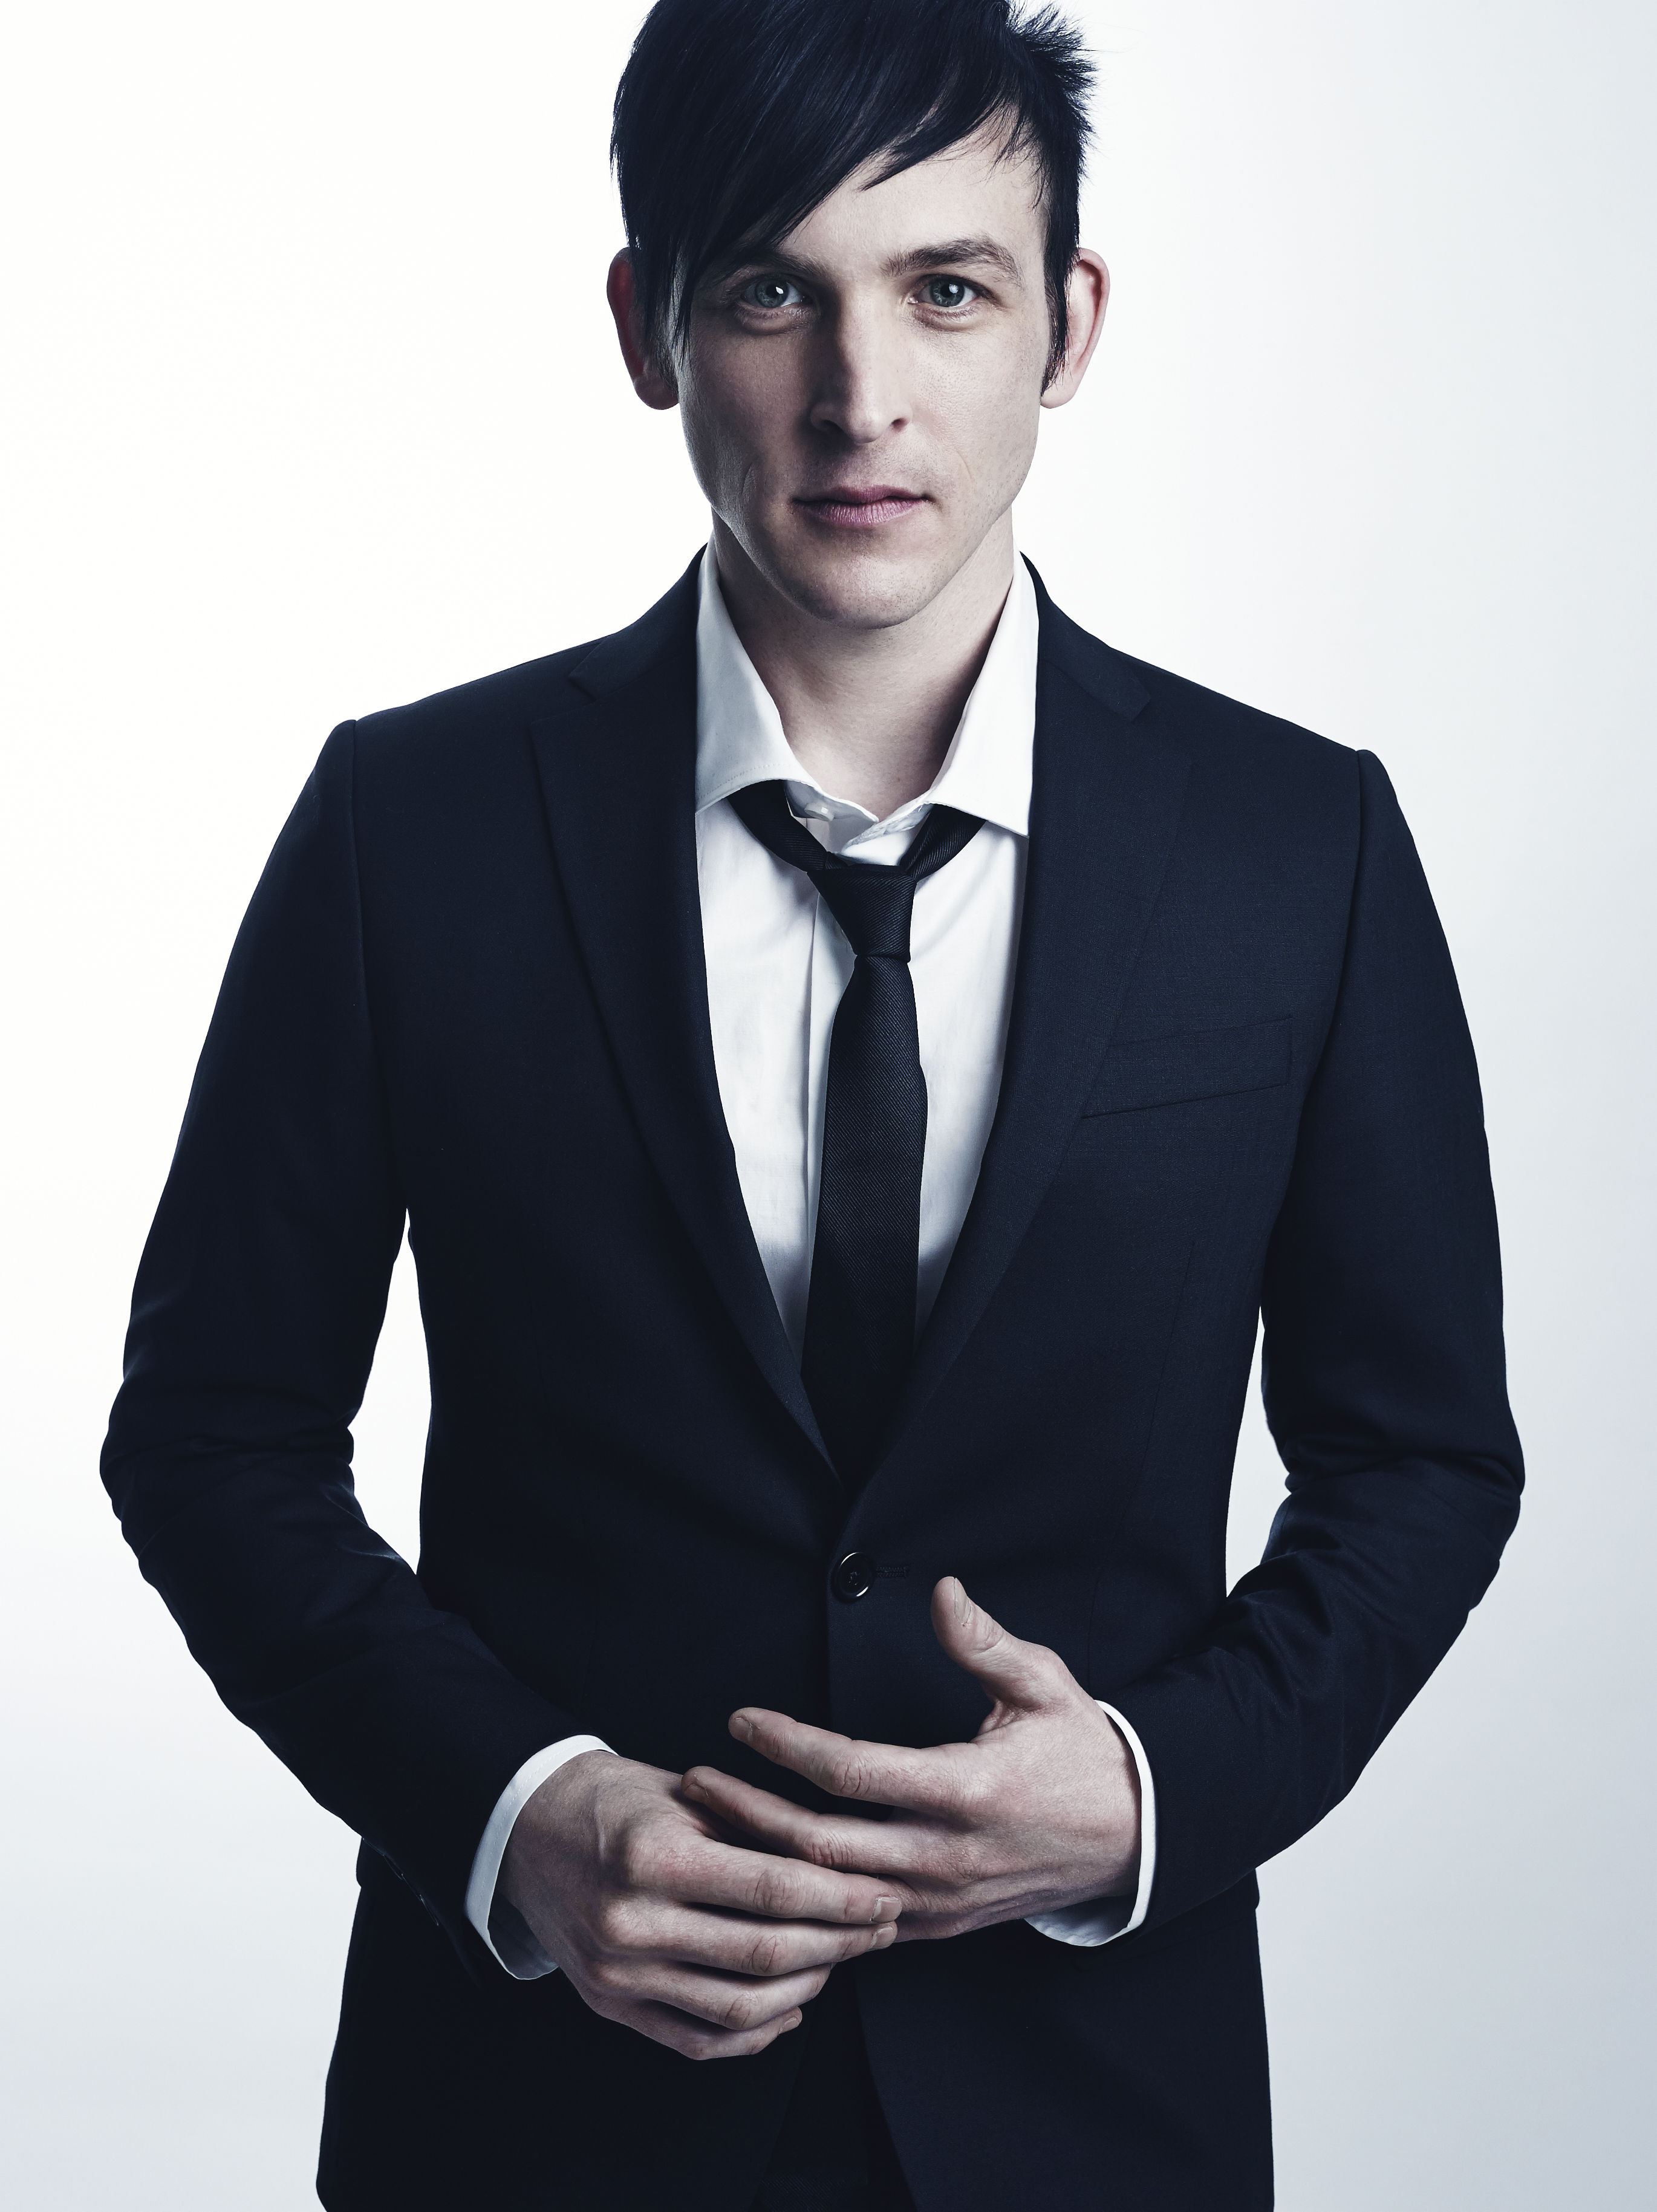 robin-lord-taylor-pictures